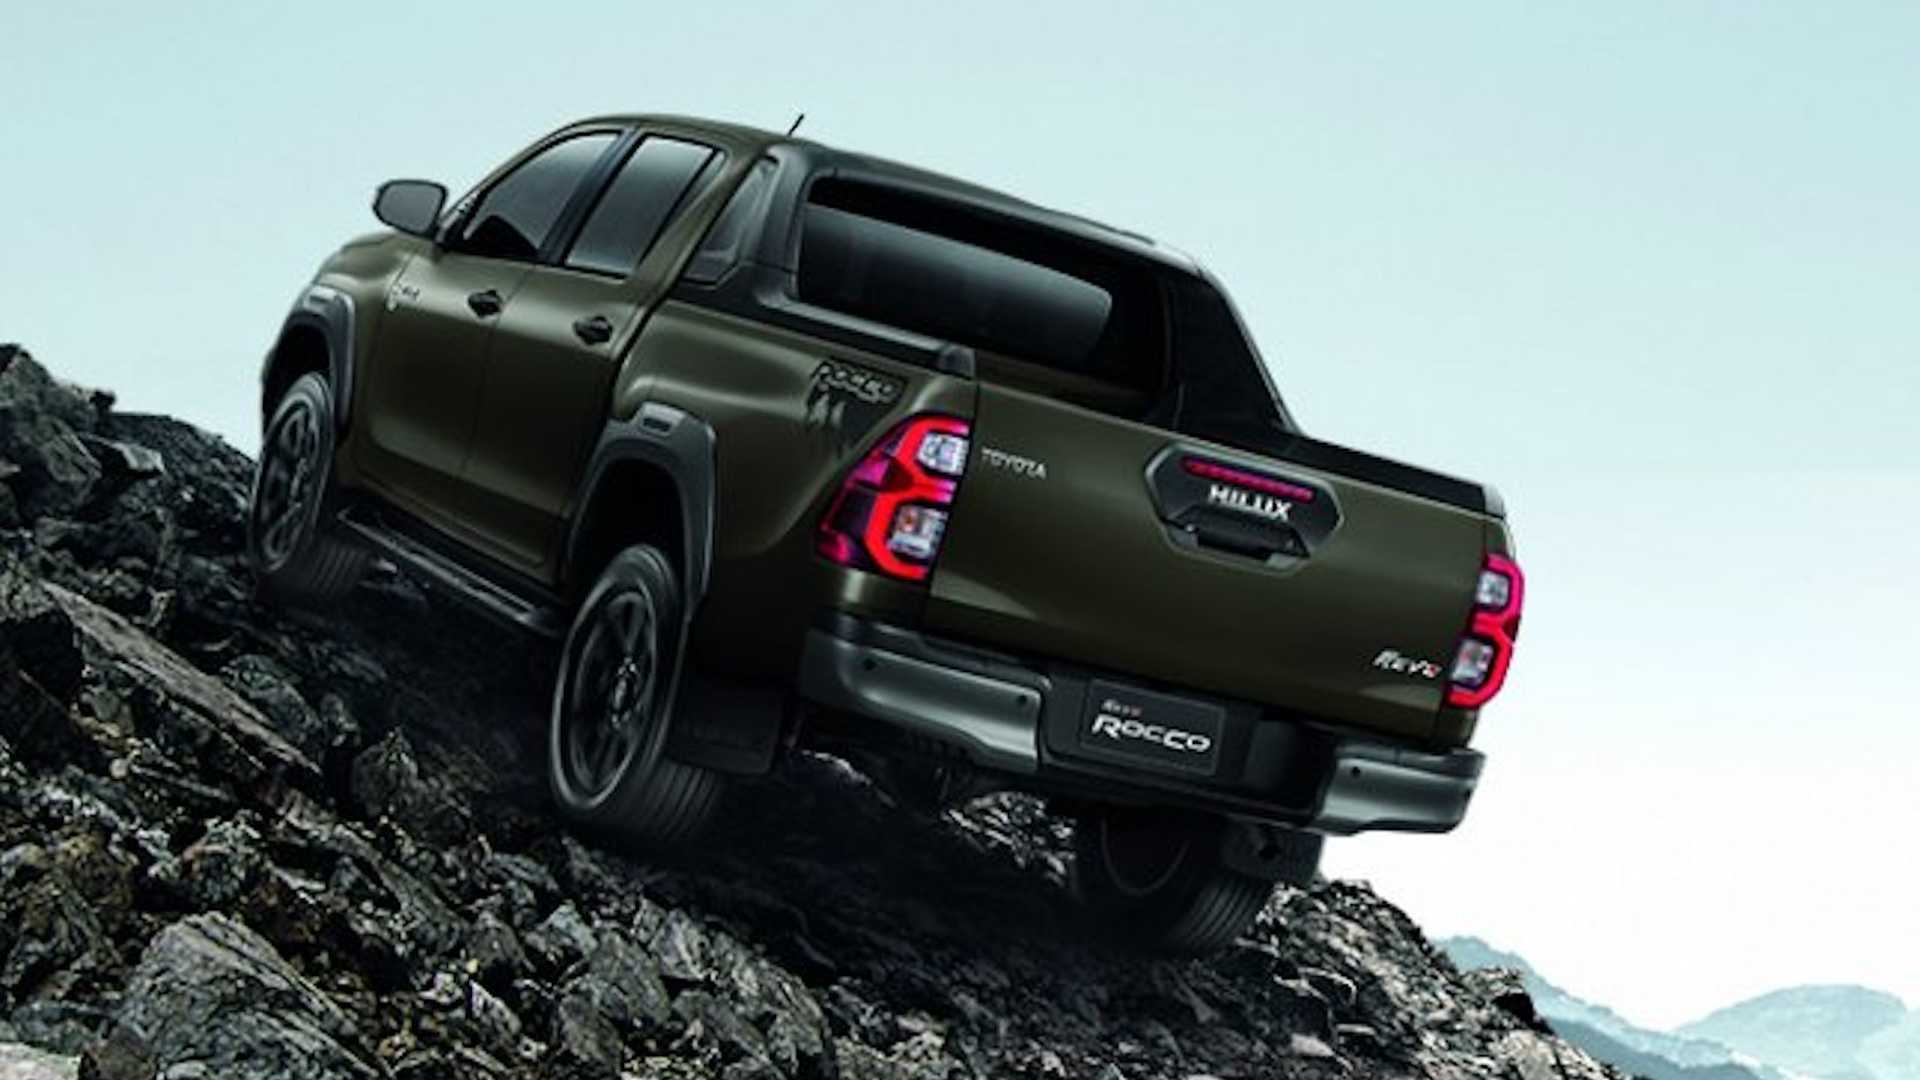 2021-toyota-hilux-launched-in-thailand-8.jpg